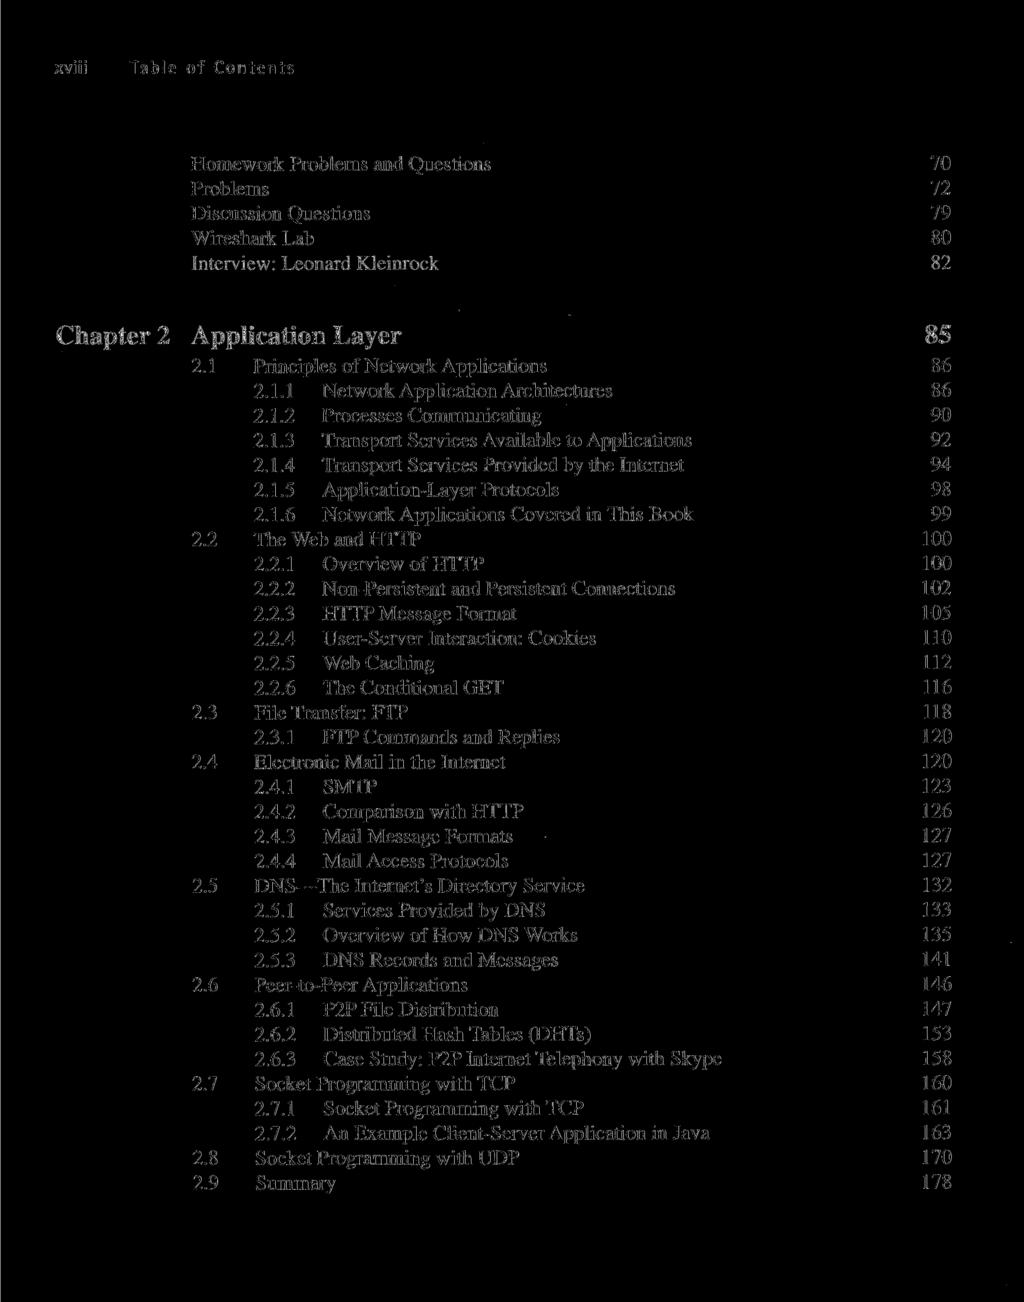 xviii Table of Contents Homework Problems and Questions 70 Problems 72 Discussion Questions 79 Wireshark Lab 80 Interview: Leonard Kleinrock 82 Chapter 2 Application Layer 85 2.